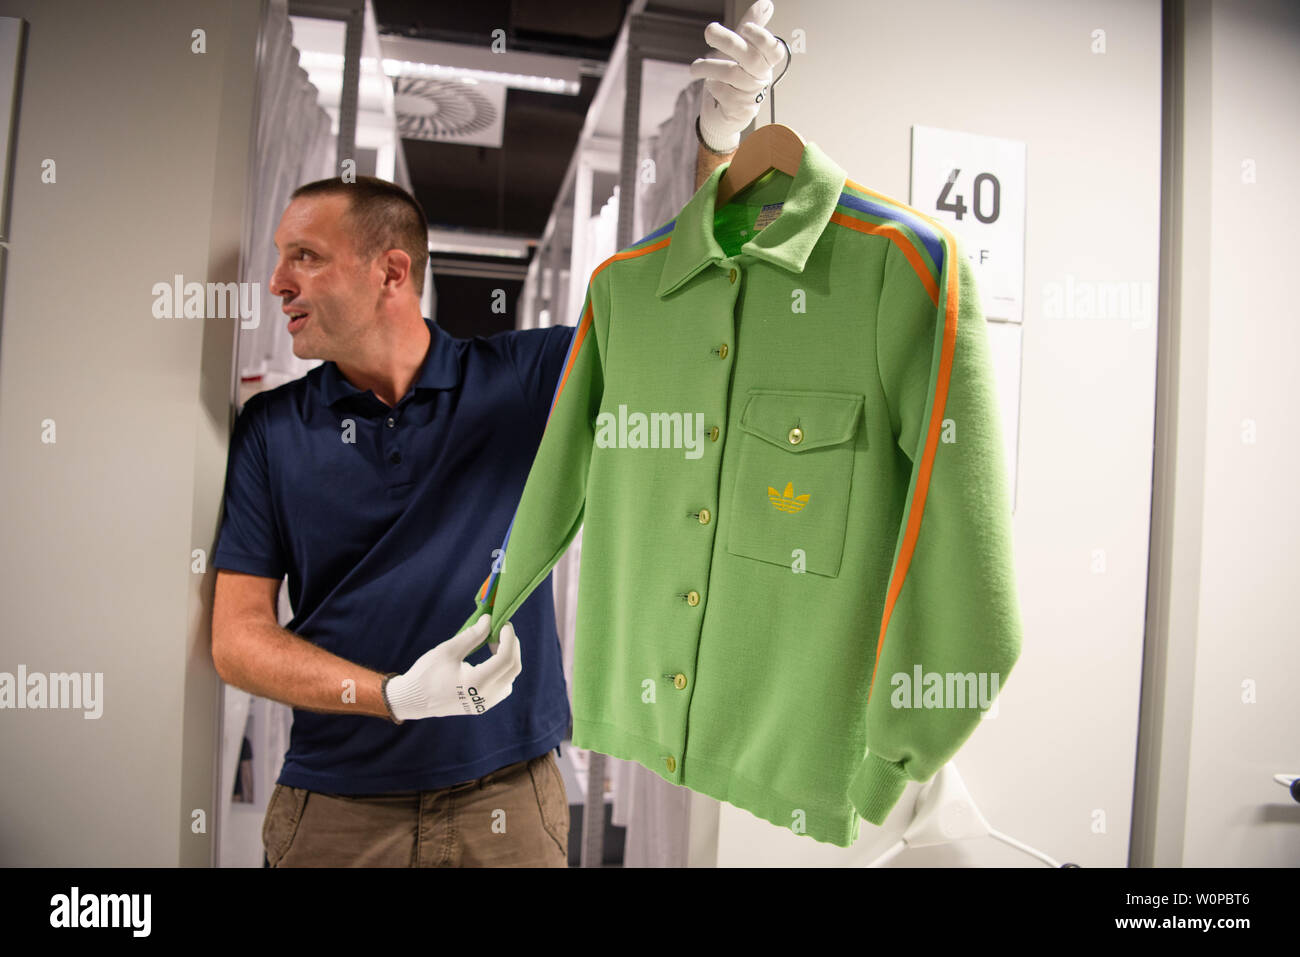 Herzogenaurach, Germany. 26th June, 2019. Martin Gebhardt, archivist of the  sporting goods manufacturer "adidas", shows the presentation suit of the  German Olympic team from 1972 in the company's archive. The ladies wear